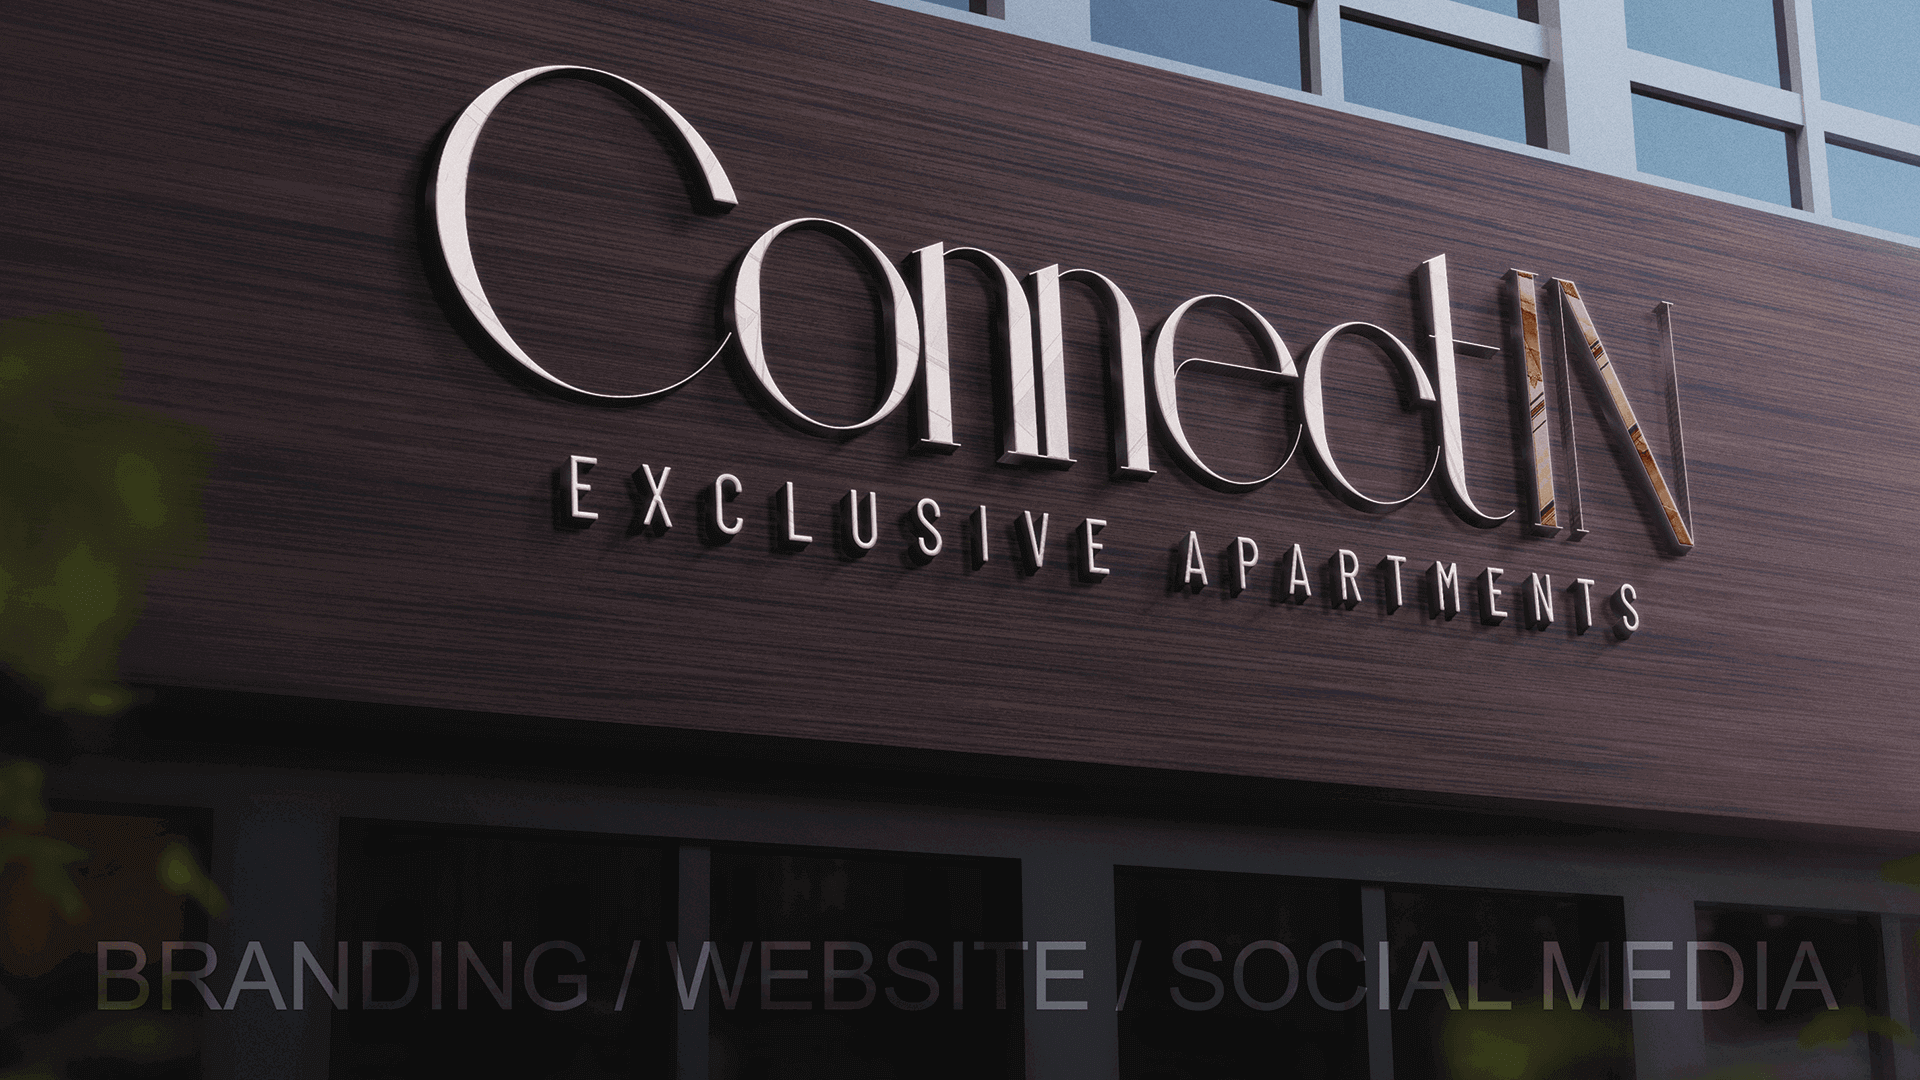 ConnectIN – Exclusive apartments you wish you lived in